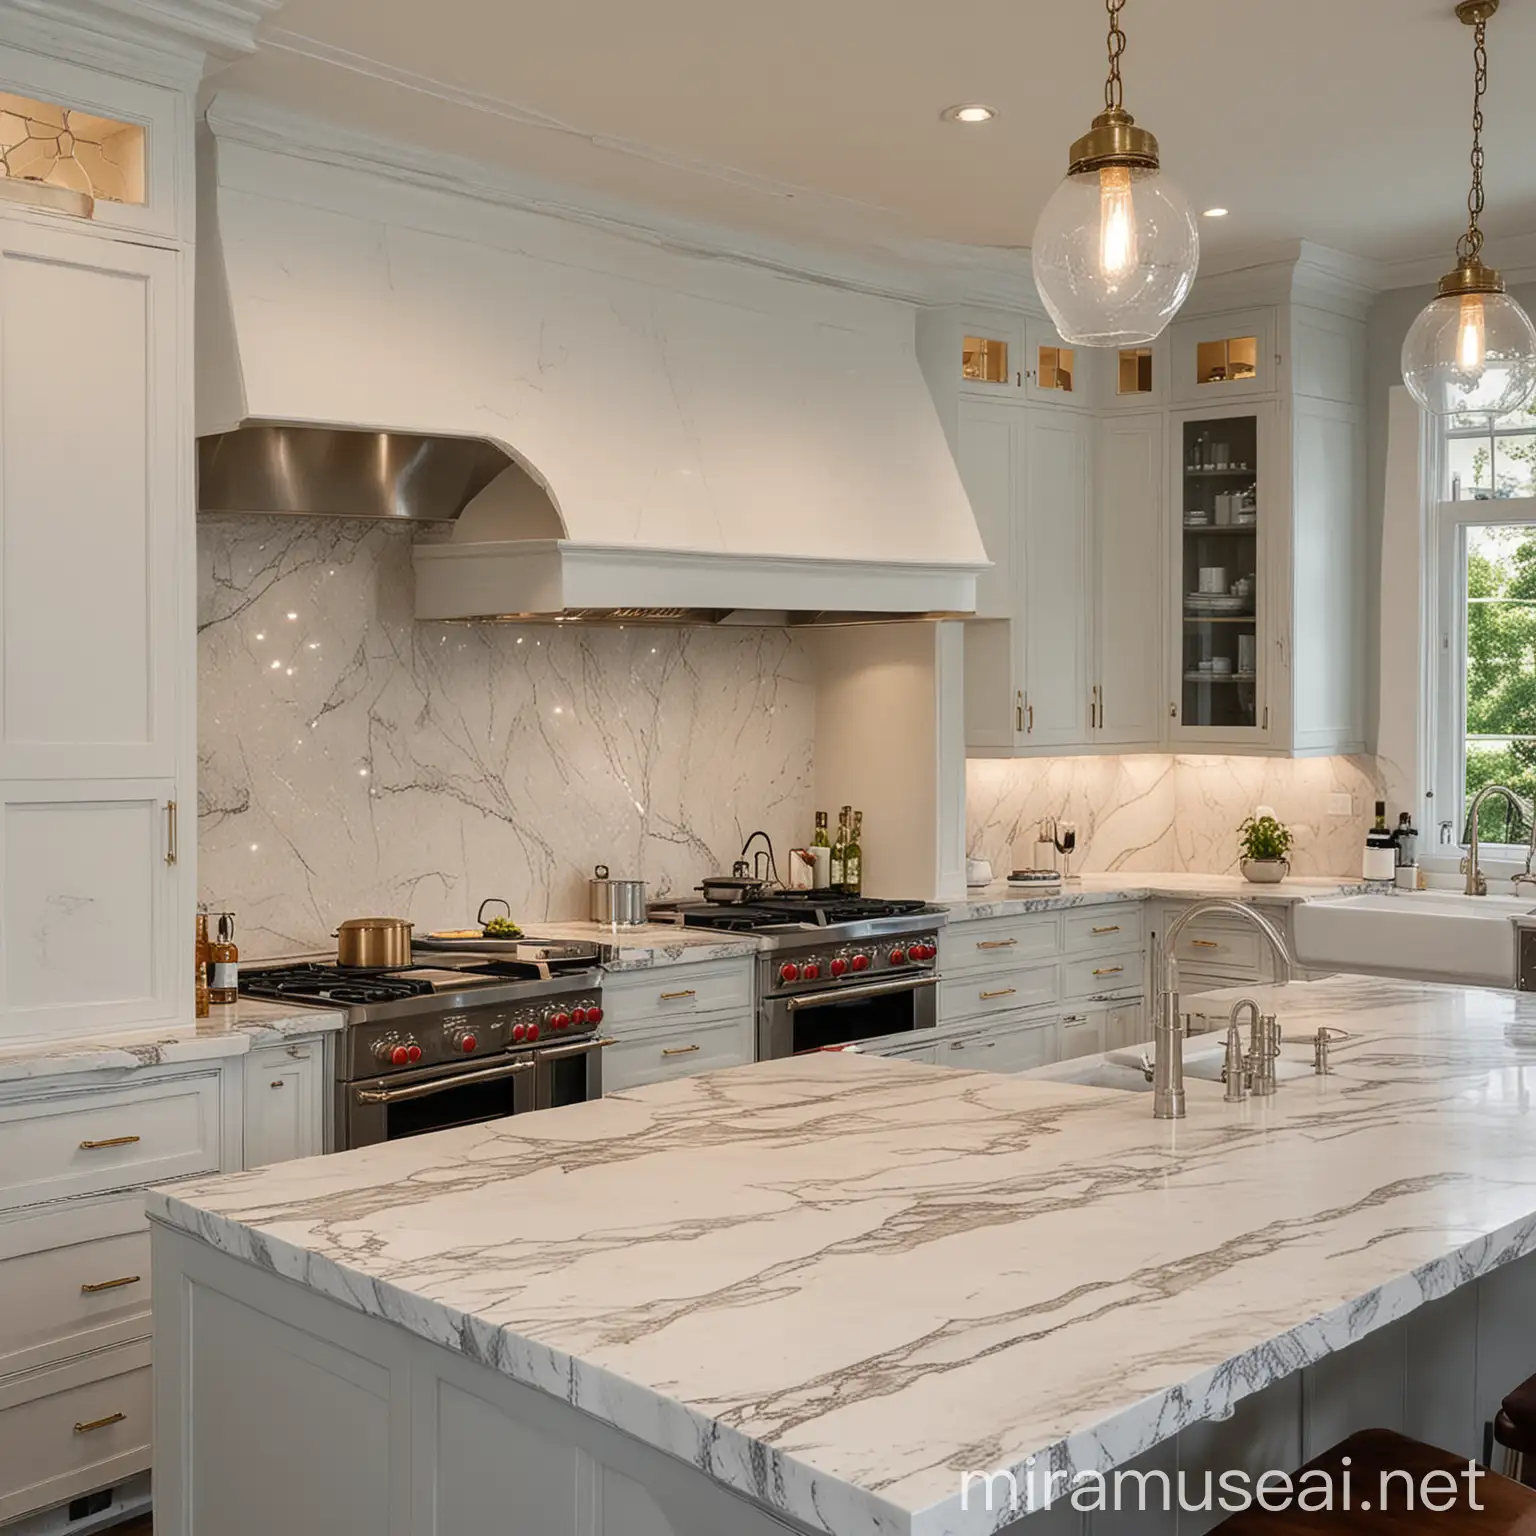 Luxury Vintage Modern Kitchen with Quartzite Countertops and Inset Cabinets